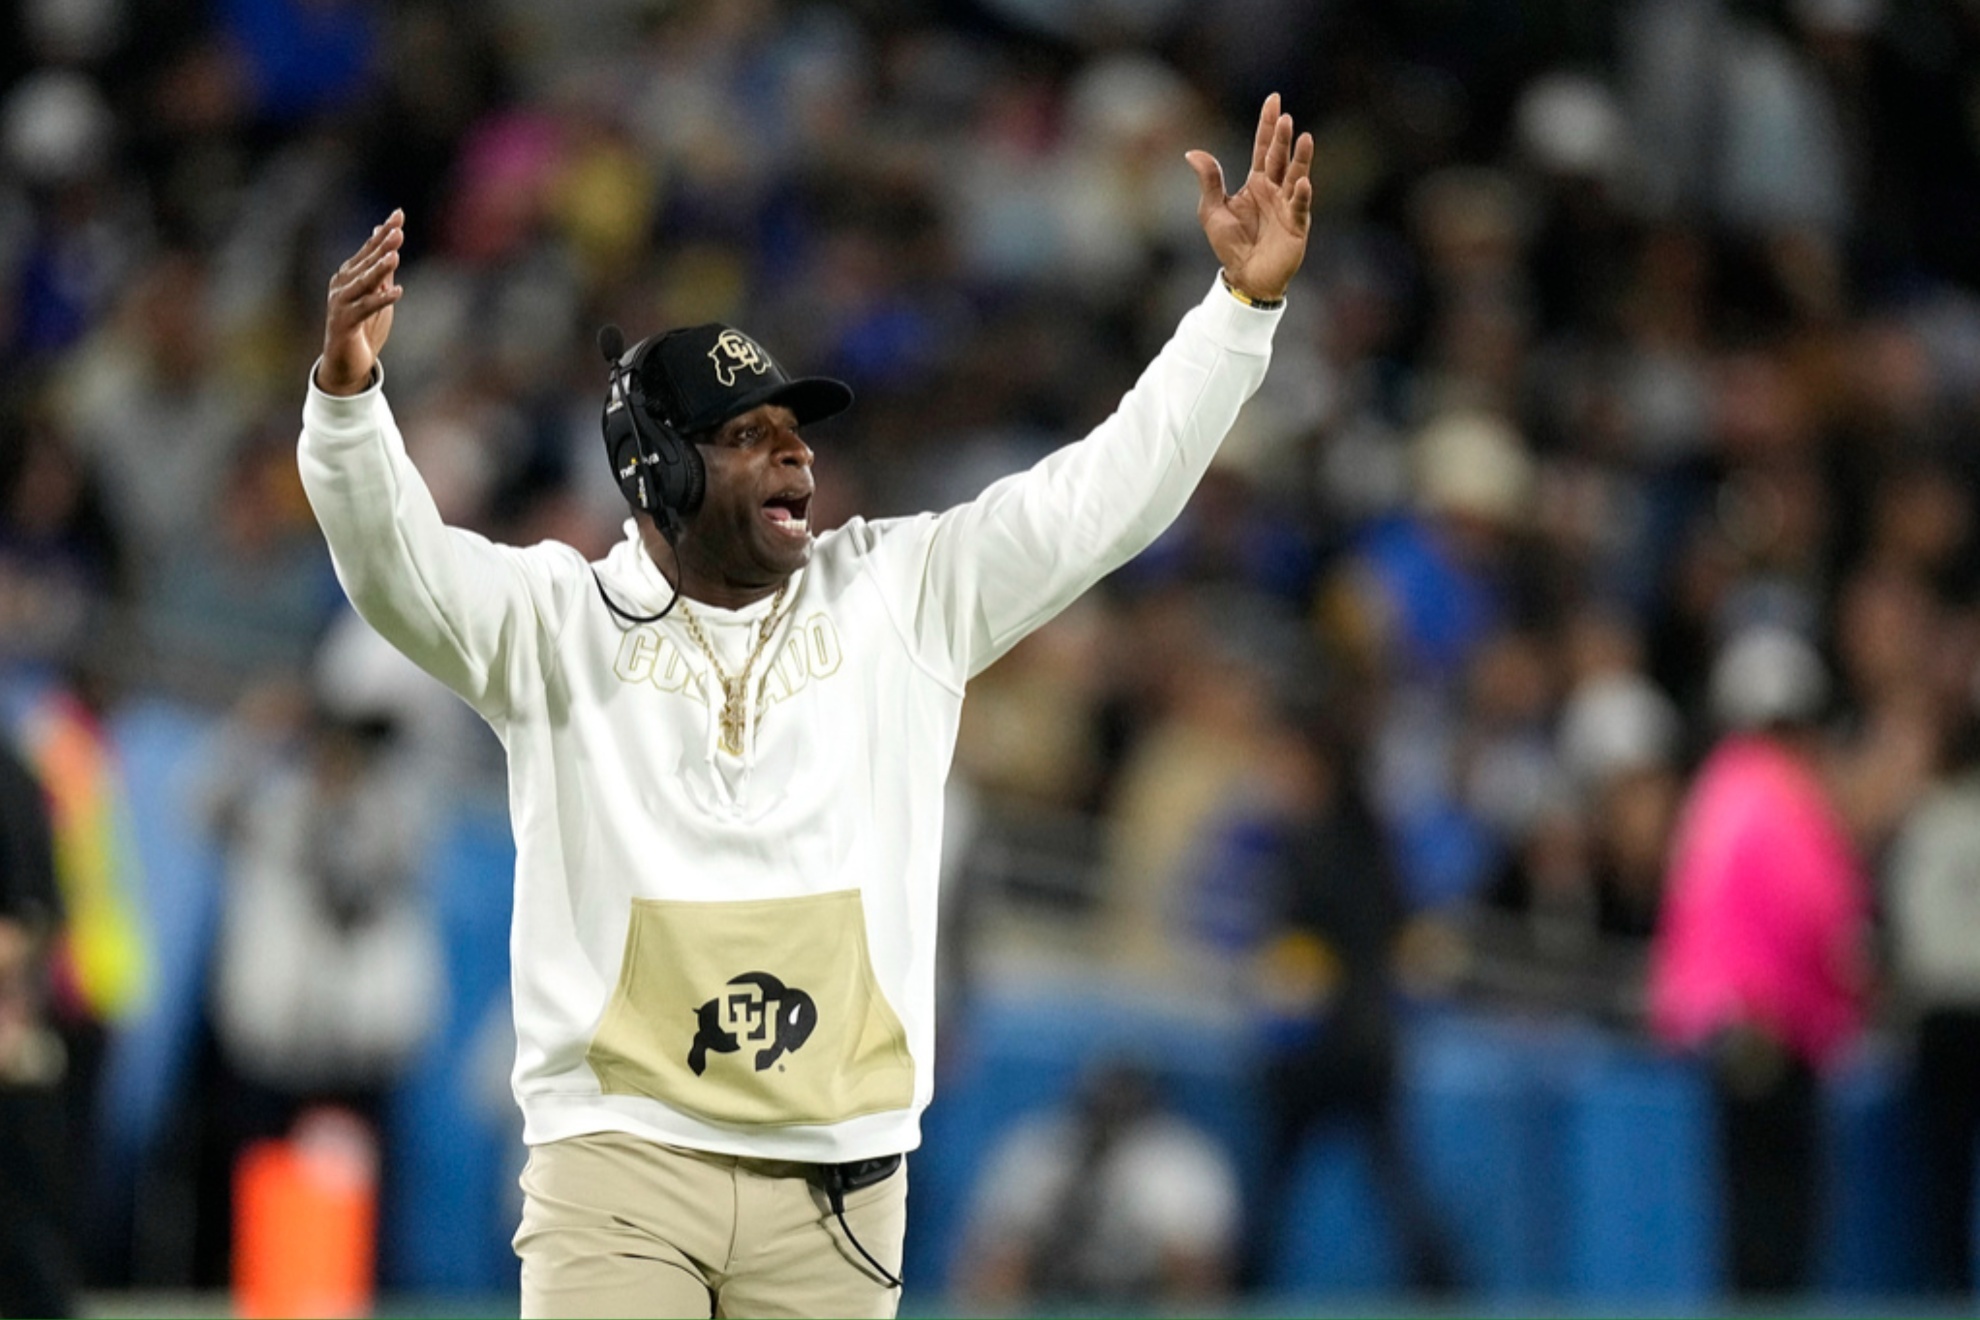 Deion Sanders at the second half of the game against UCLA.